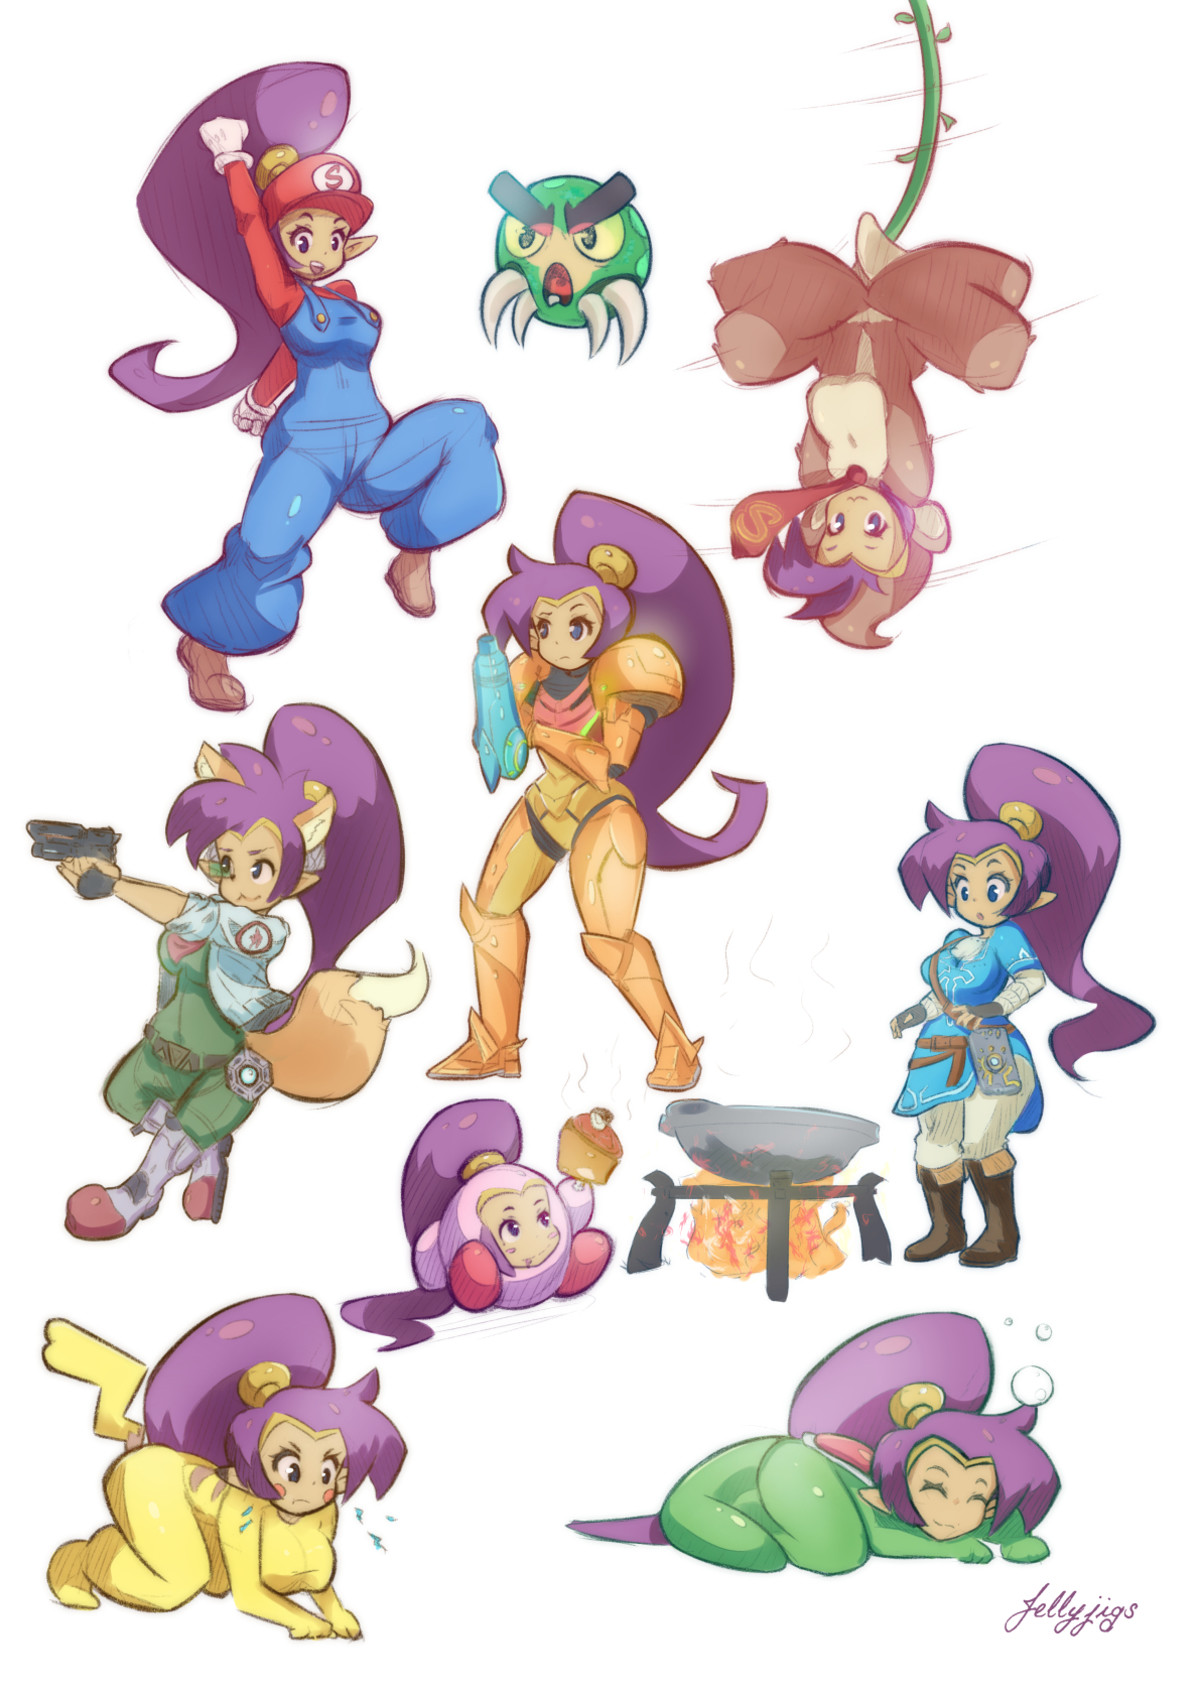 Shantae for Smash. Source illust.php?mode=medium&amp;illustid=70231707 join list: SnortingVideogames (124 subs)Mention History join list:. Shantae in smash would be awesome, but we're past that point as of now